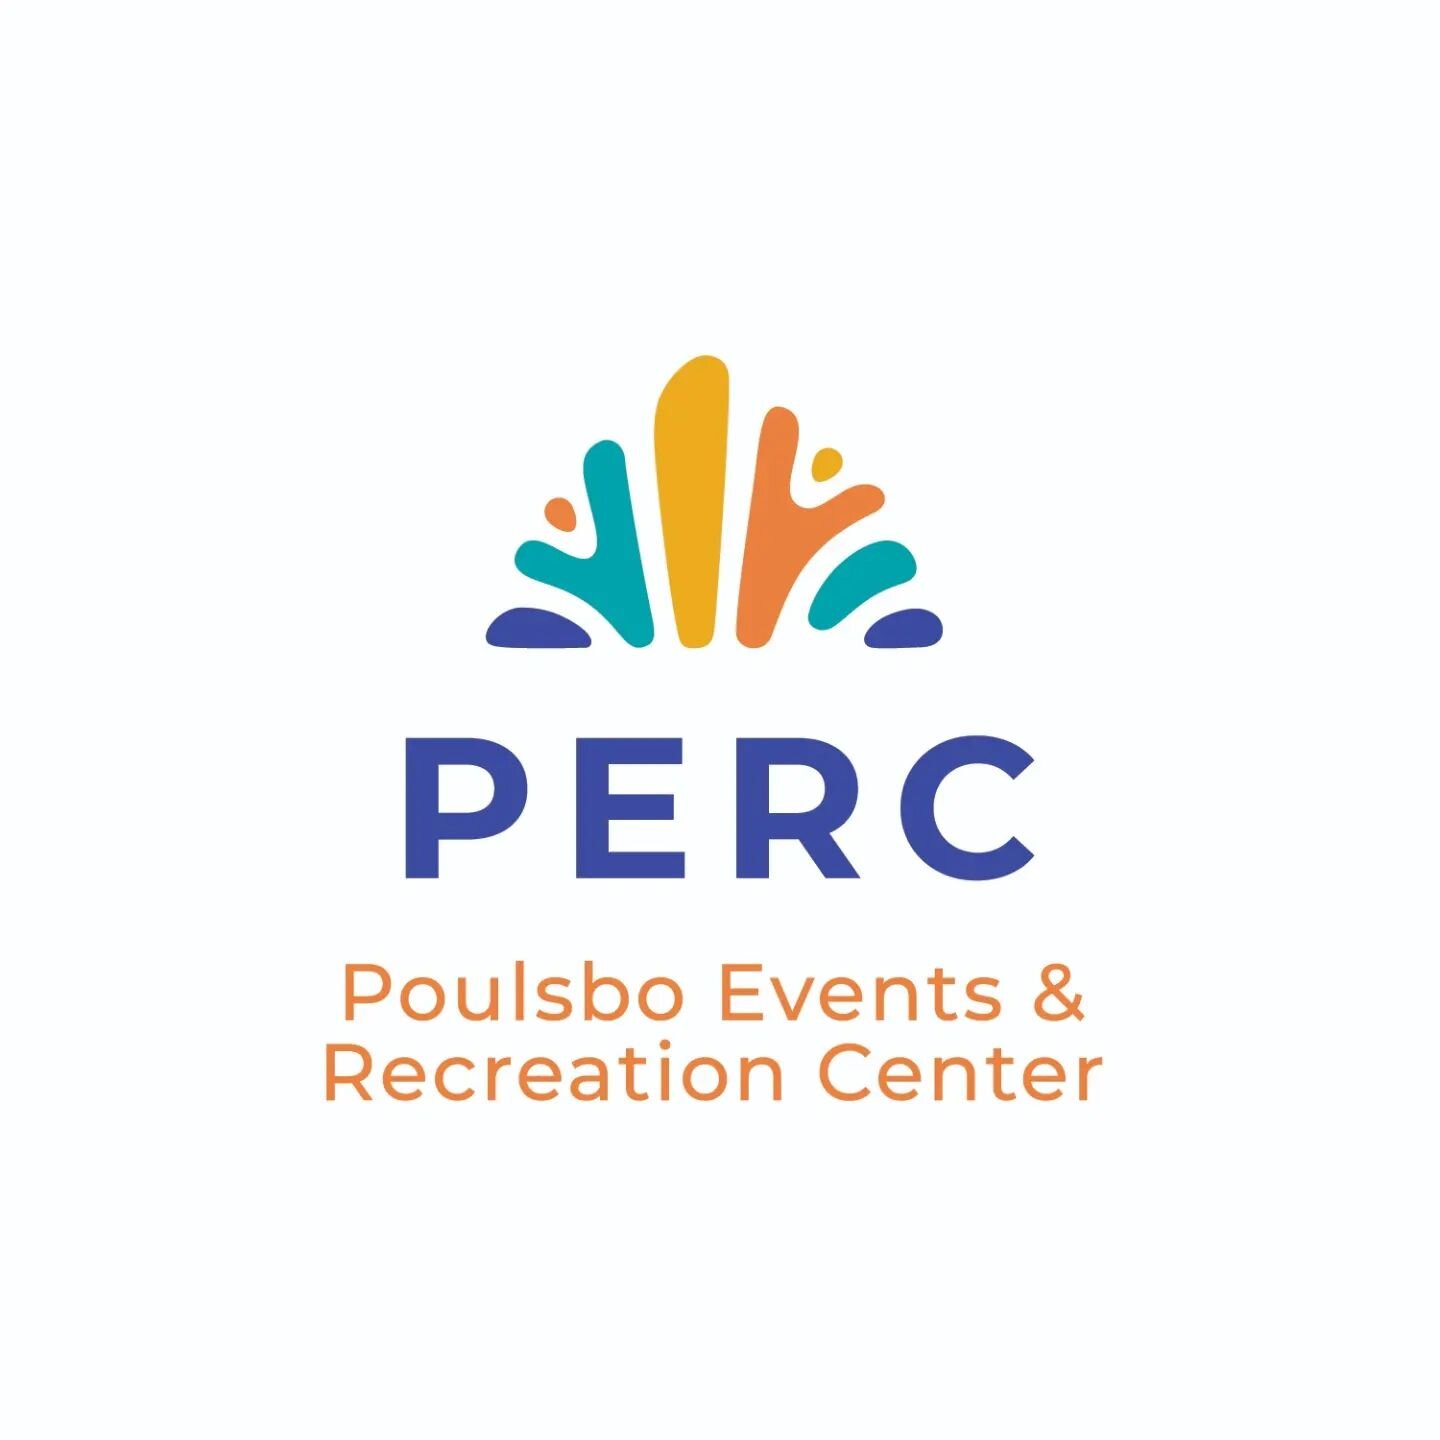 Have you heard? The City of Poulsbo is working on an events and recreation center with help and participation from the community! I was thrilled when they asked me to develop a brand to help bring their project to the public. 

If you know me, you kn